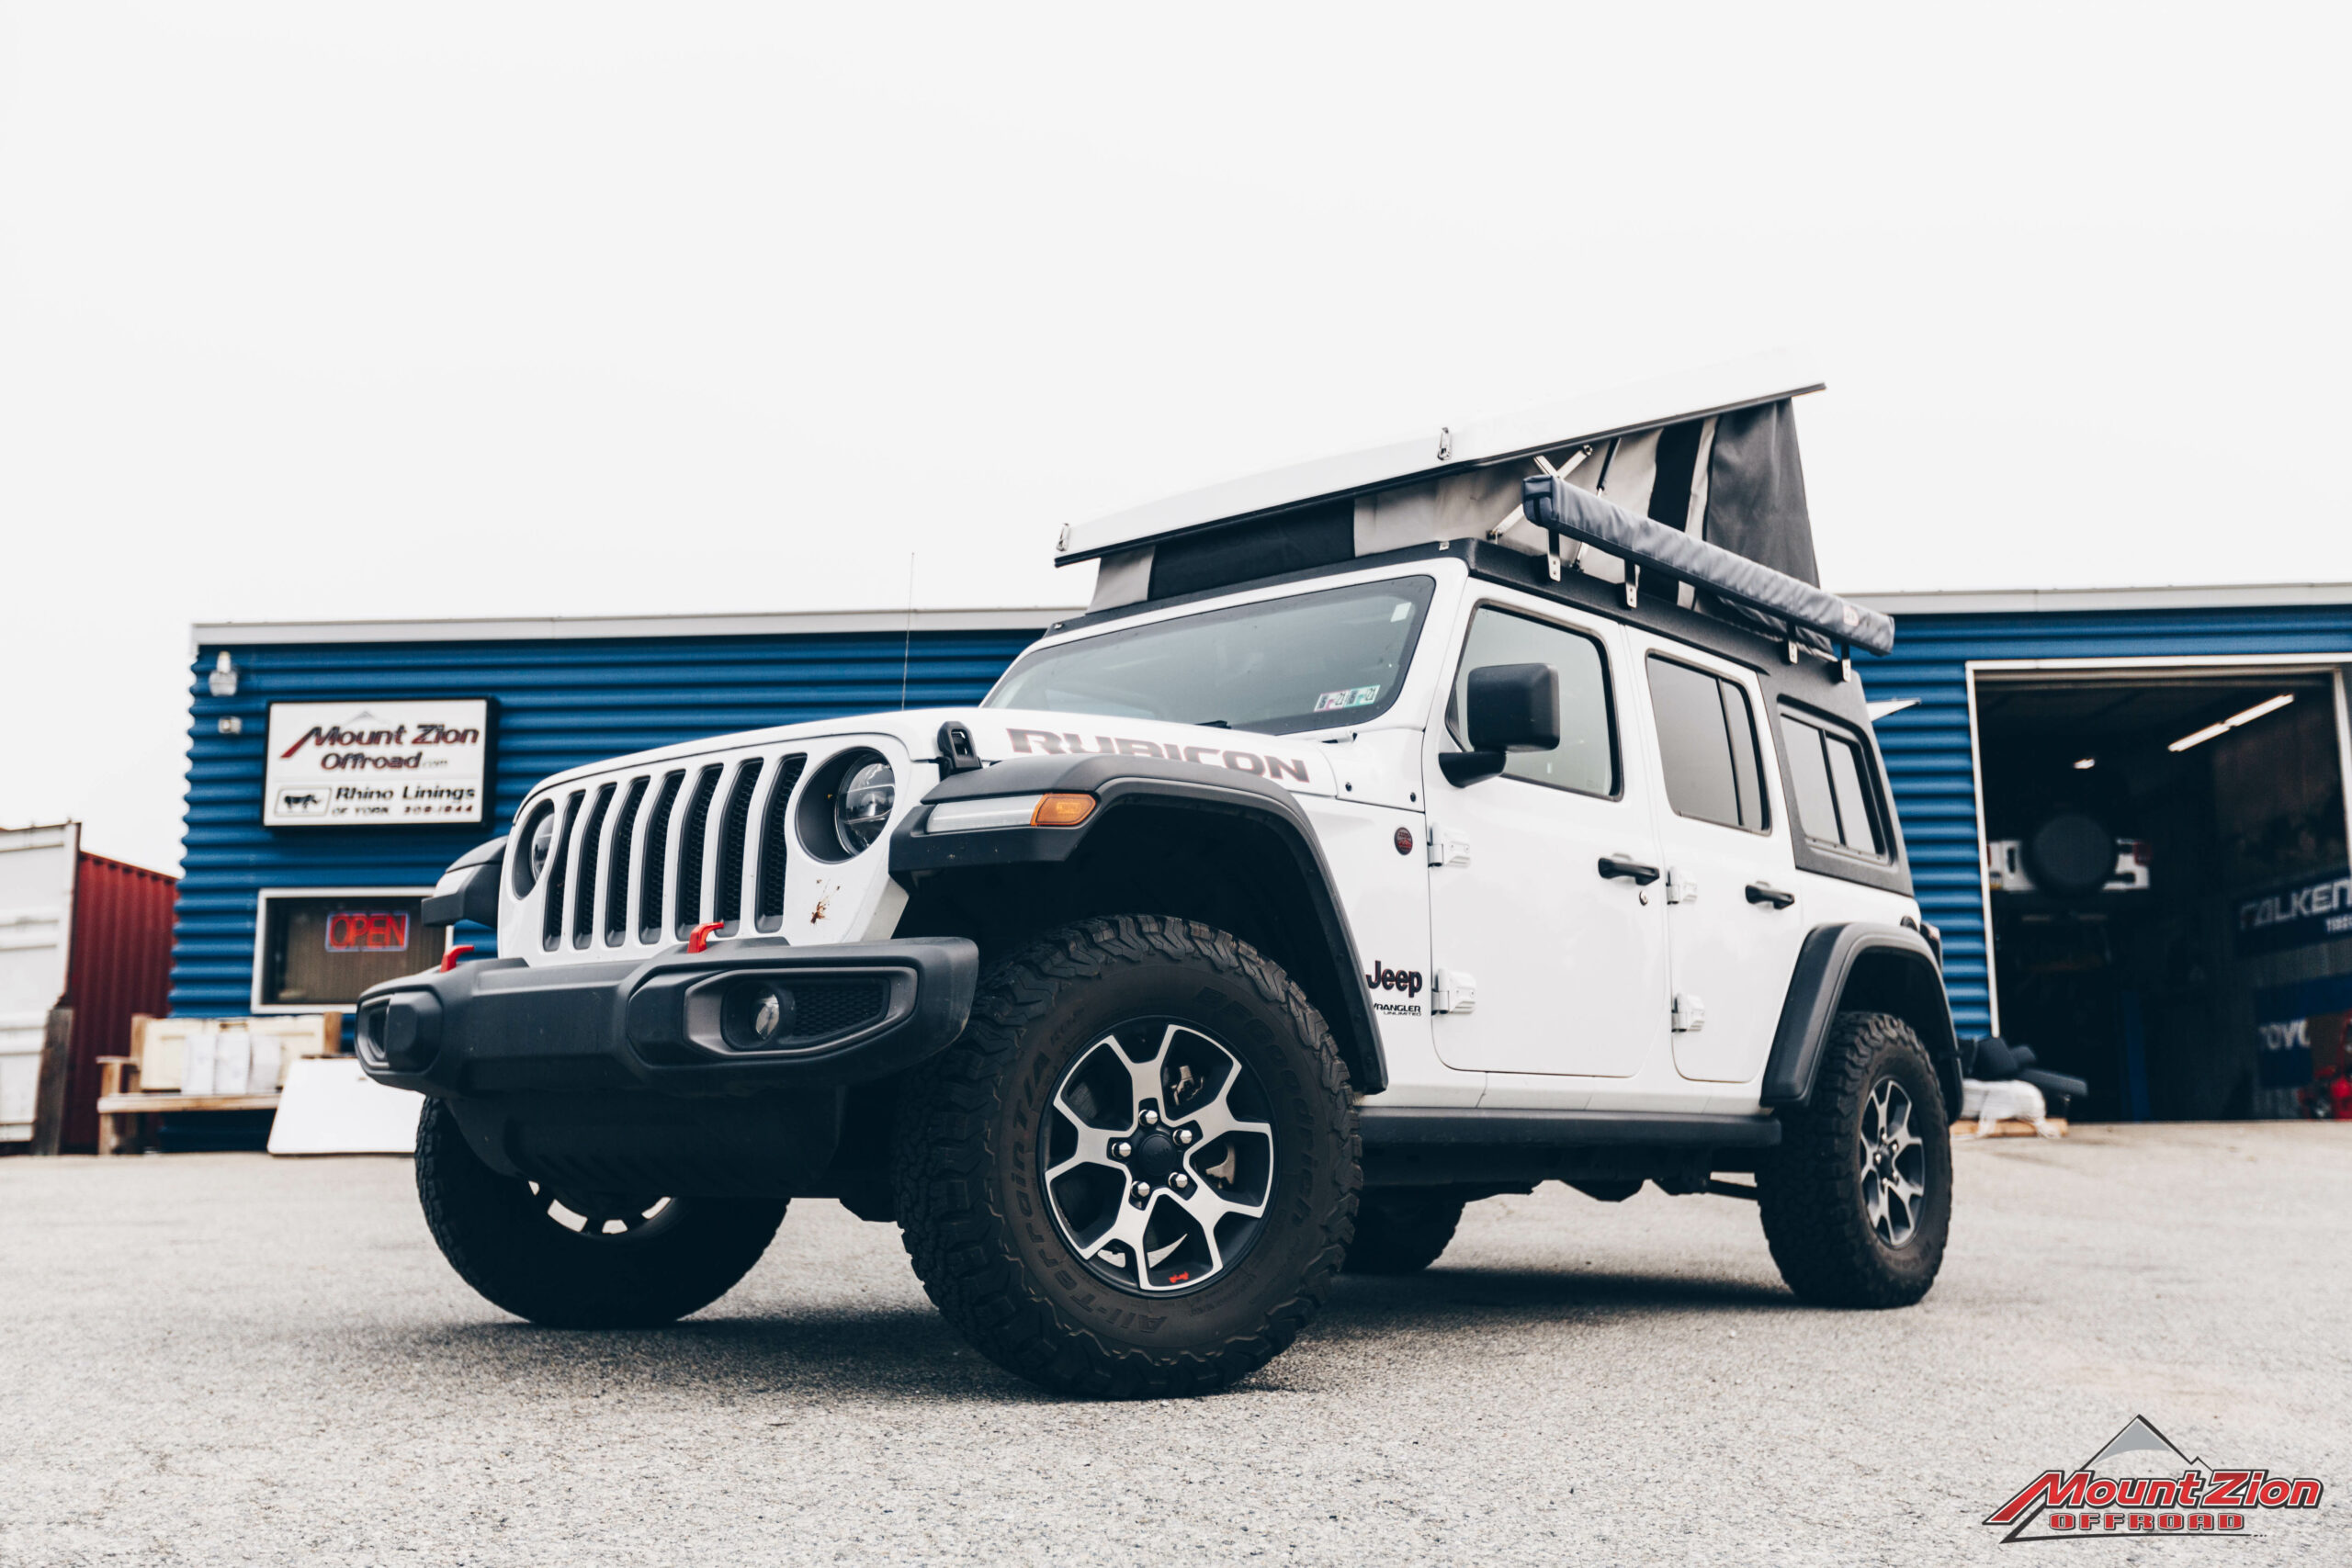 2019 Jeep Wrangler Unlimited Rubicon - Mount Zion Offroad